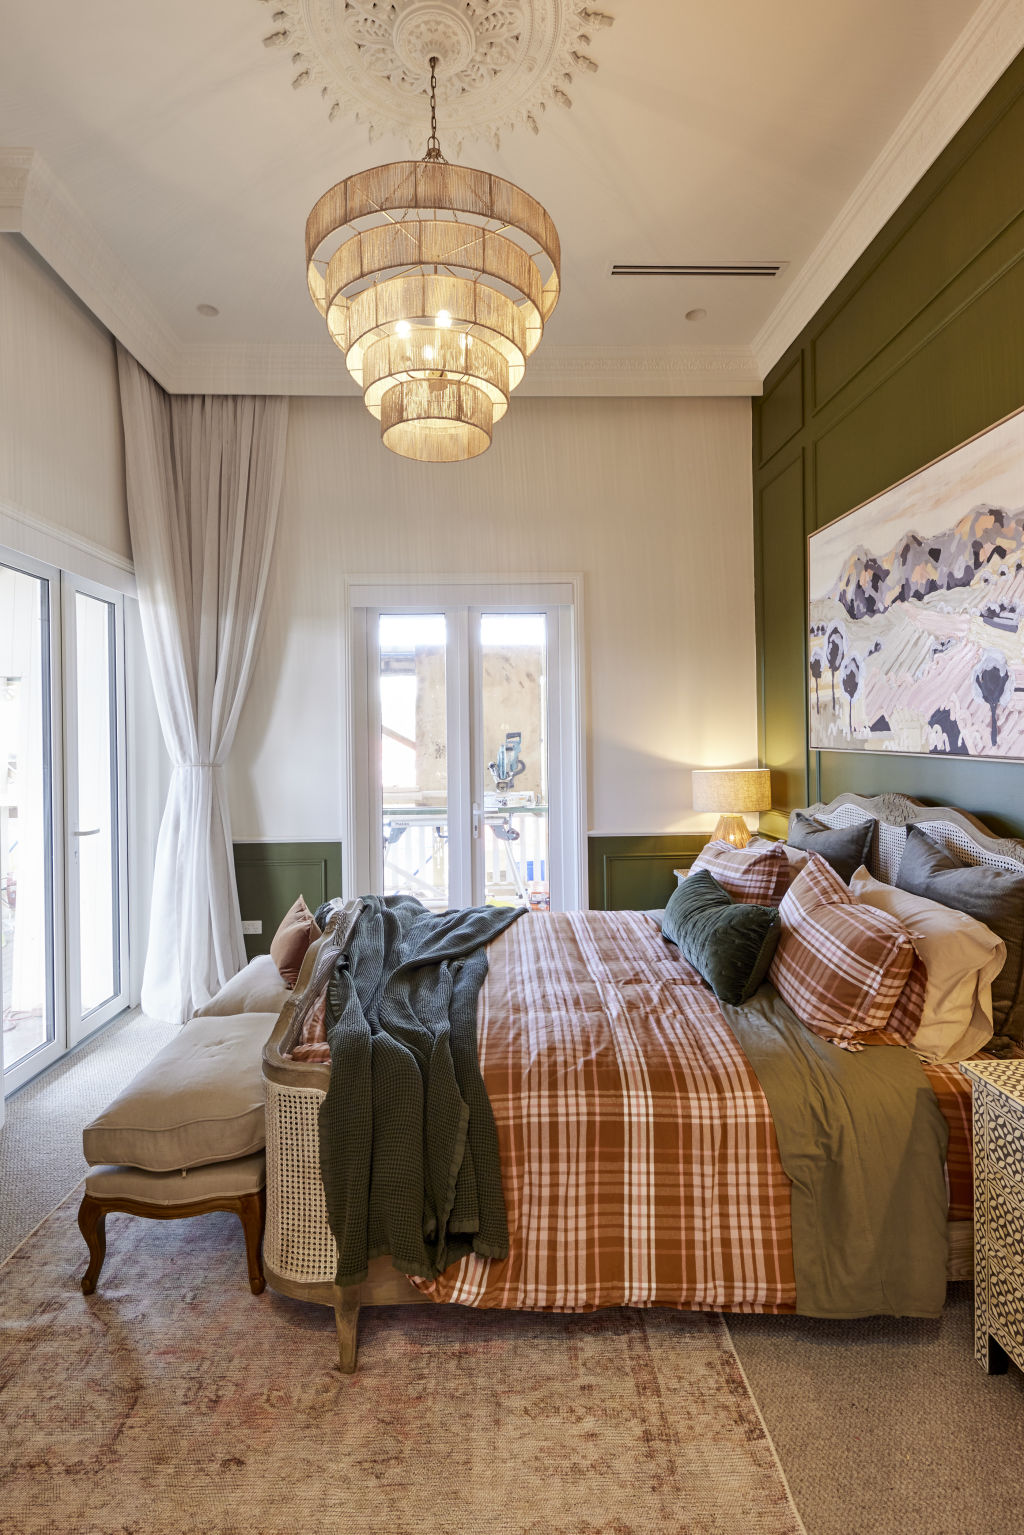 Wainscotting and paint elevates these walls from plain to country comfort. Photo: Nine